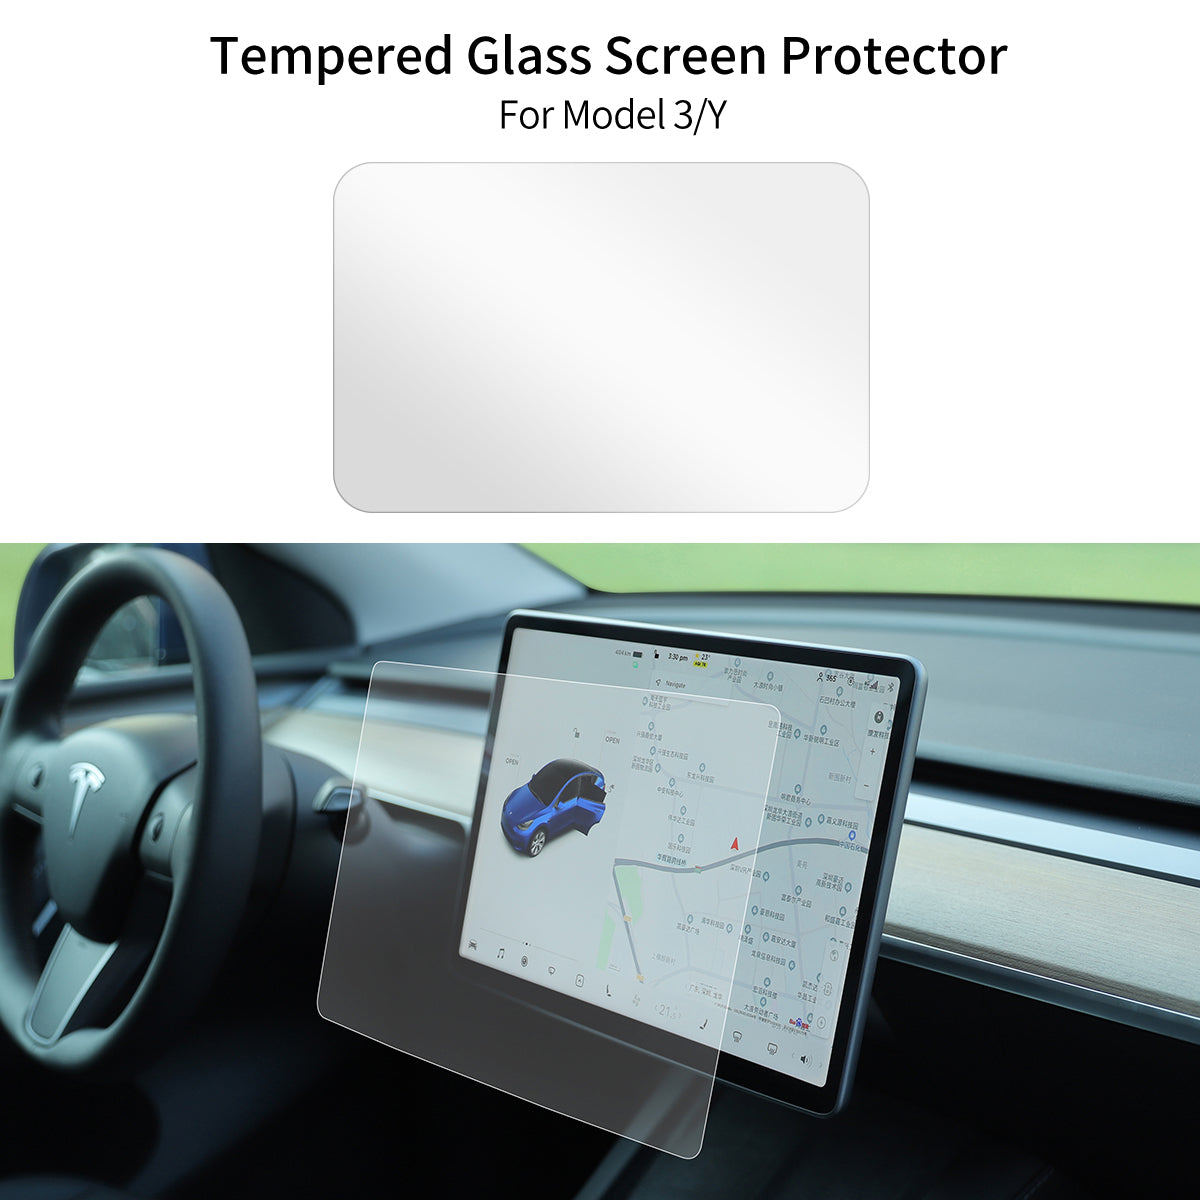 Model 3/Y: Screen Protector Tempered Glass Film H9 (mat/glossy) - Tesla -Protect